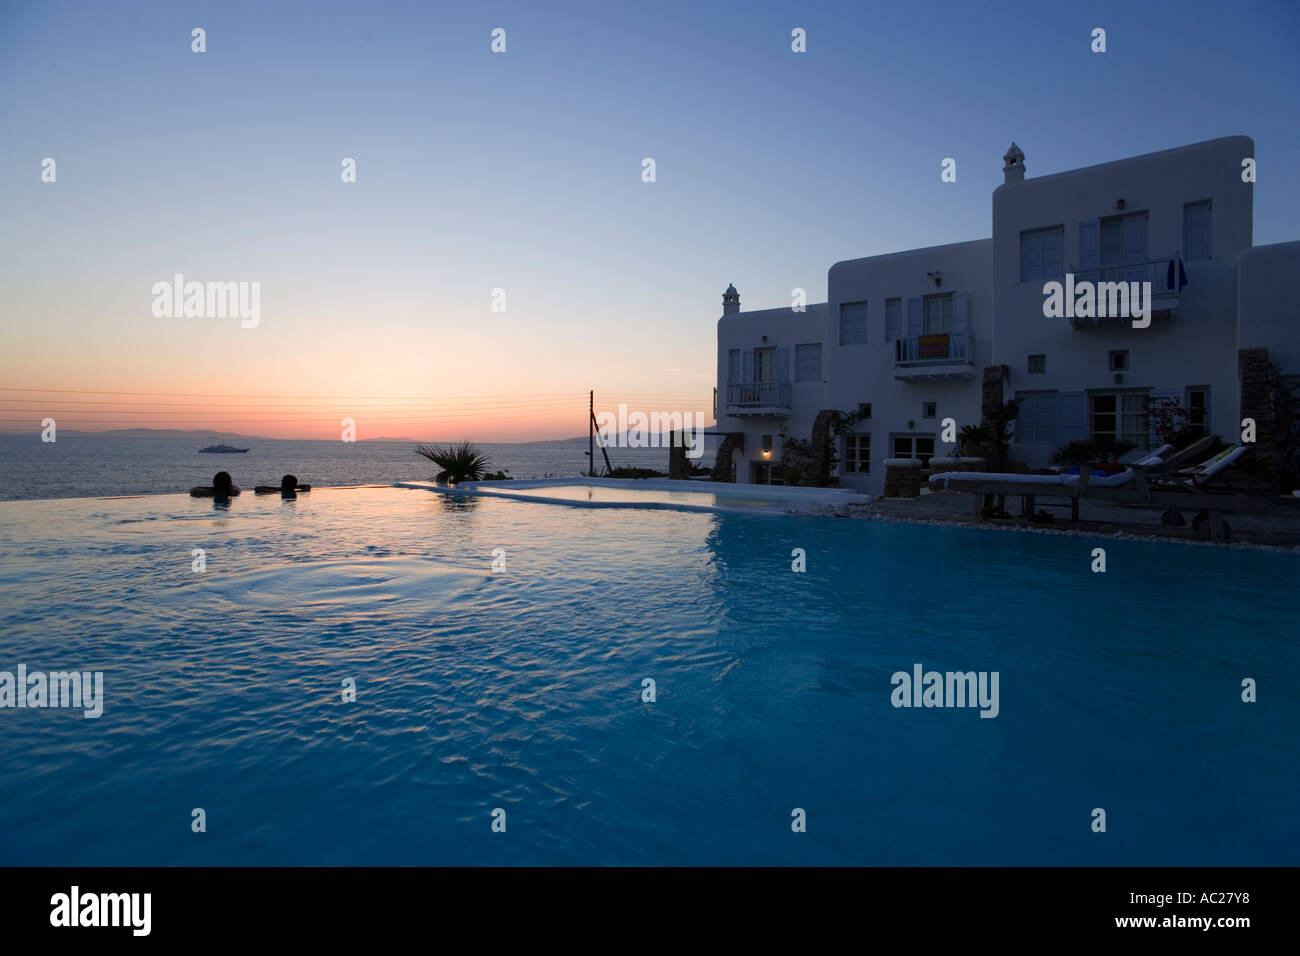 People lying in the fresh water pool and looking over the sea in the dusk Apanema Resort Hotel Mykonos Town Greece Stock Photo